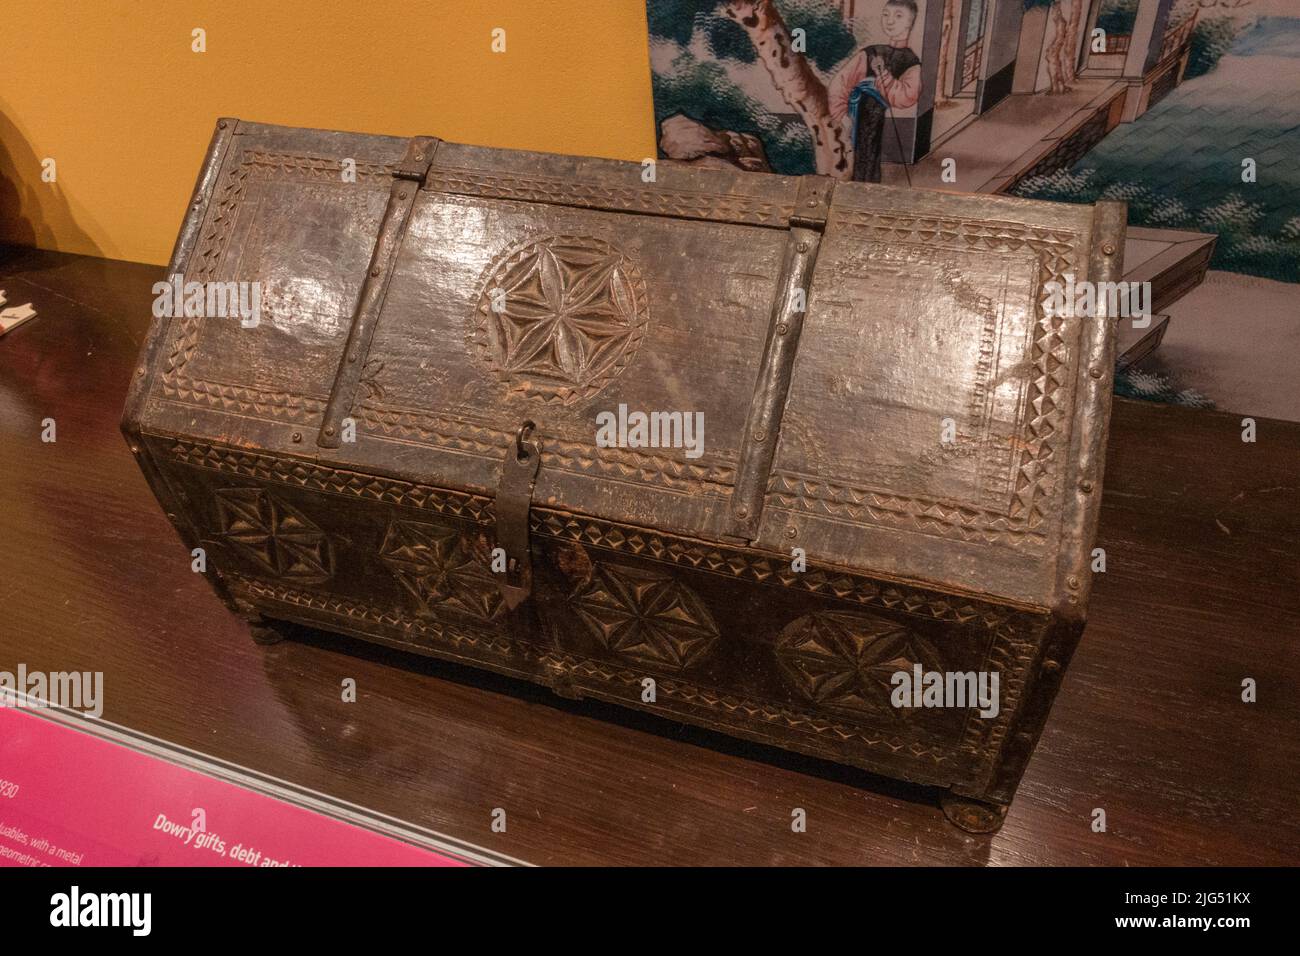 A dowry chest from Rajasthan, India, (1870-1930) on display in the UK. Stock Photo